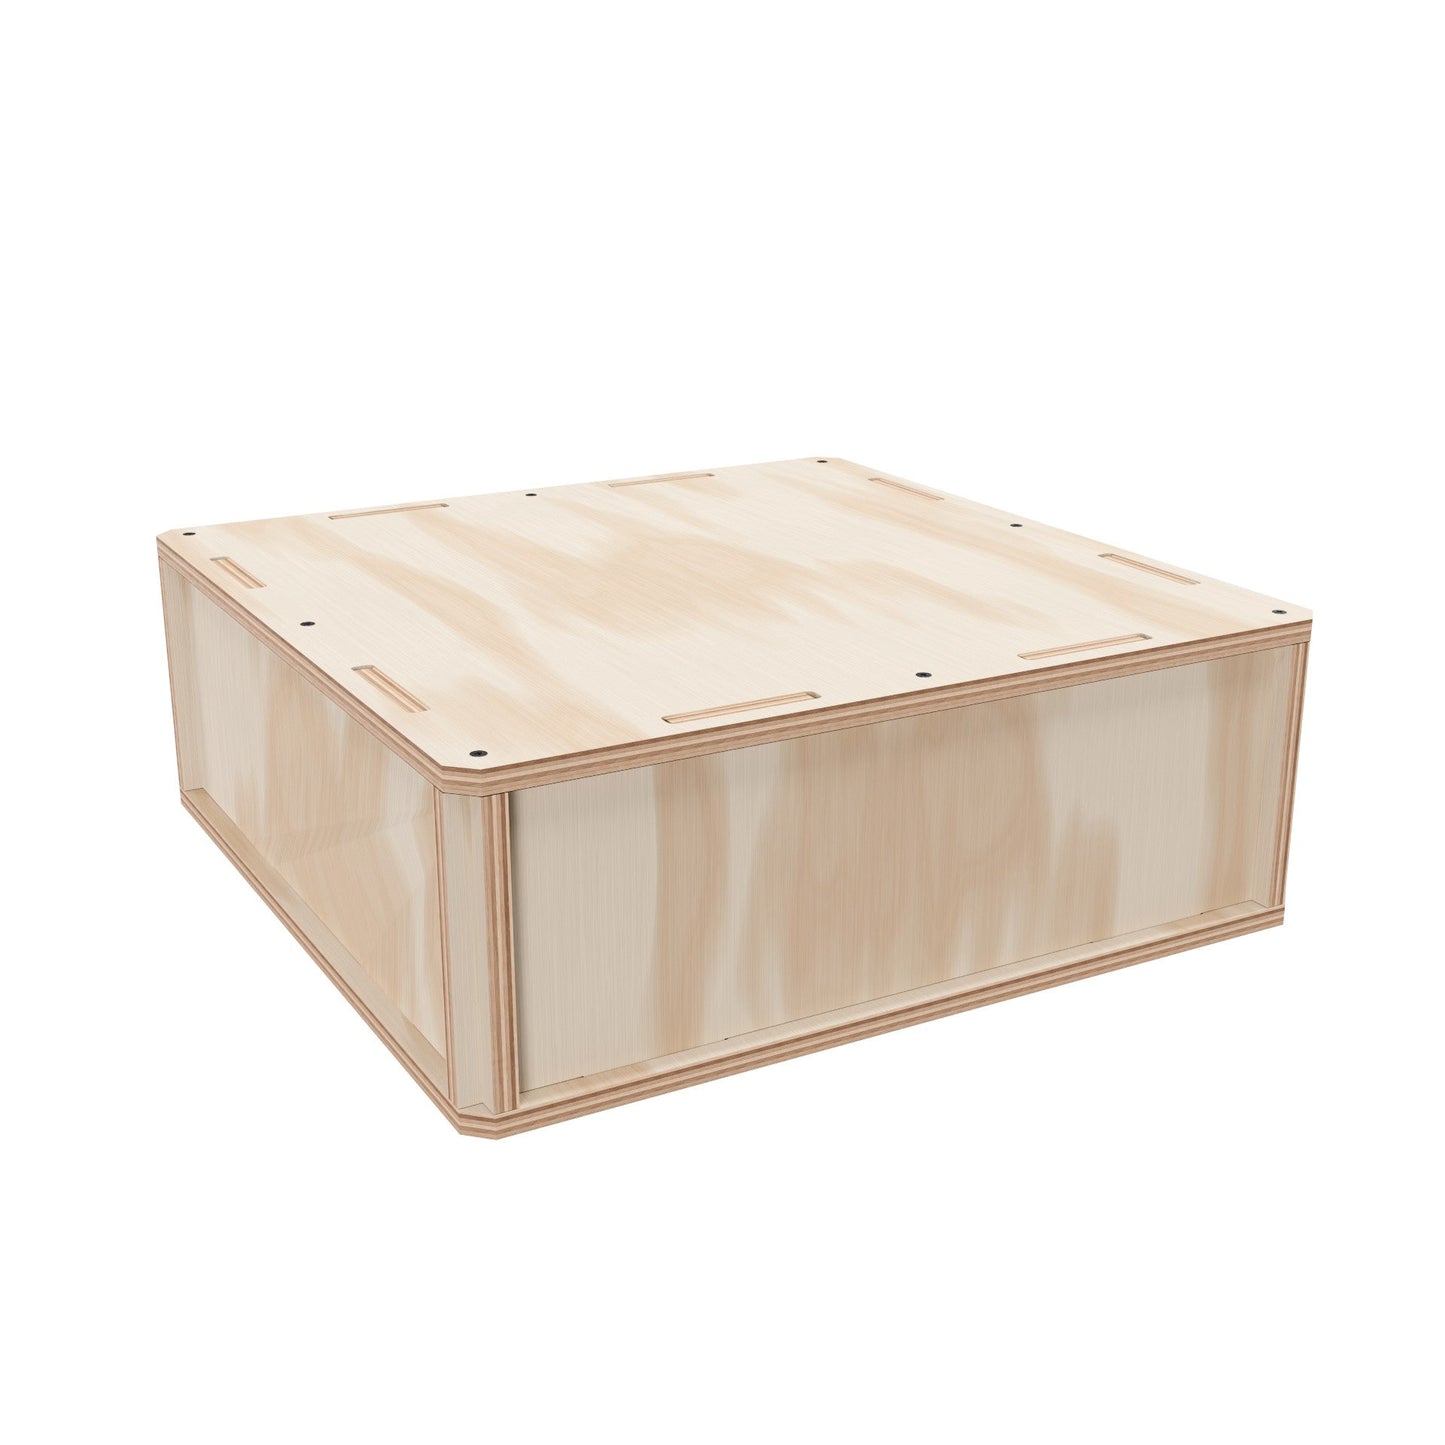 Plywood Shipping Crate 20x20x7